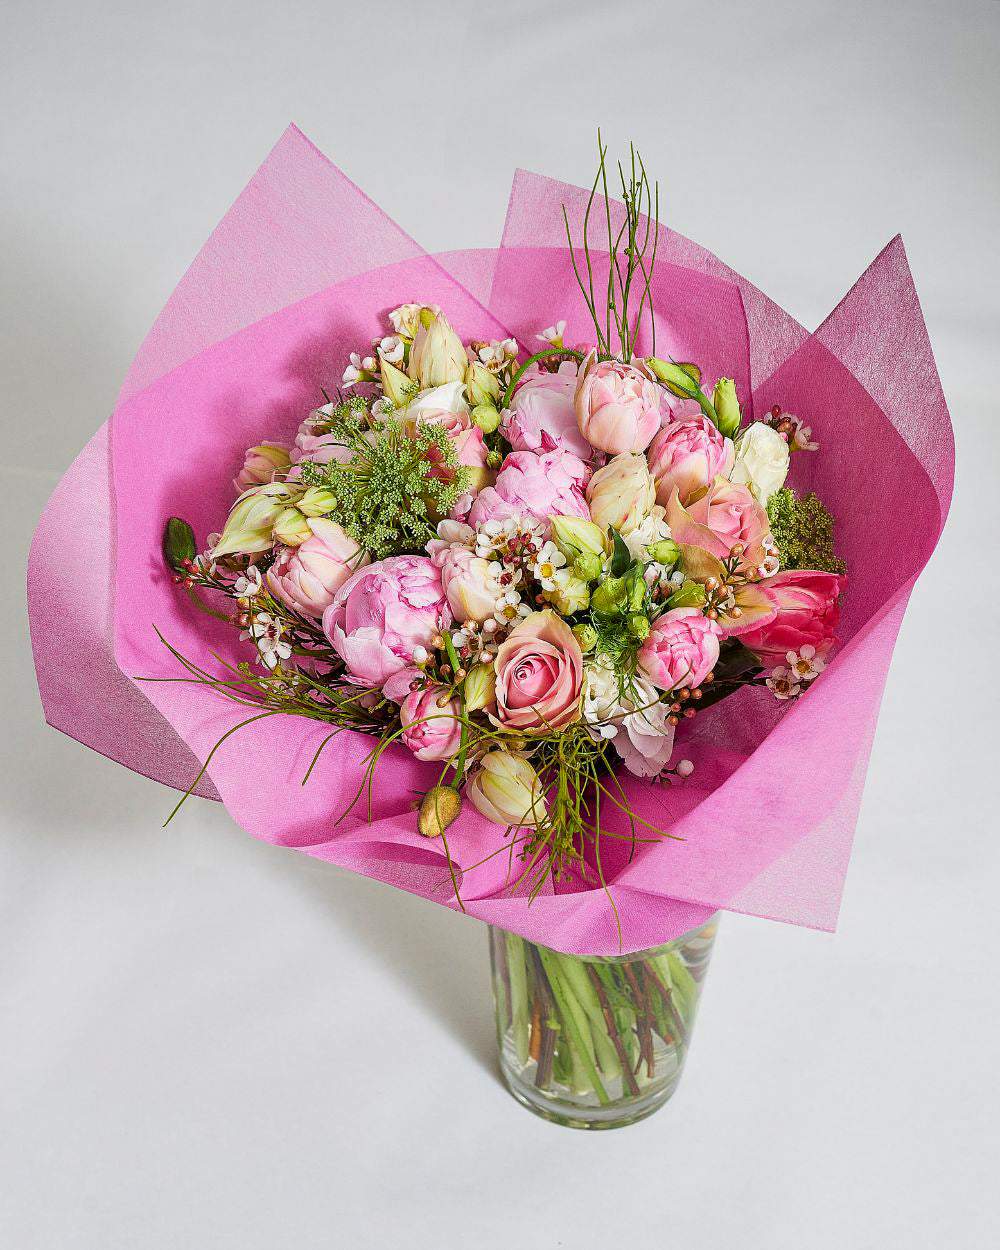 Heavenly Pink bouquet with soft pink roses and lush greenery - romantic Sydney florist gift.